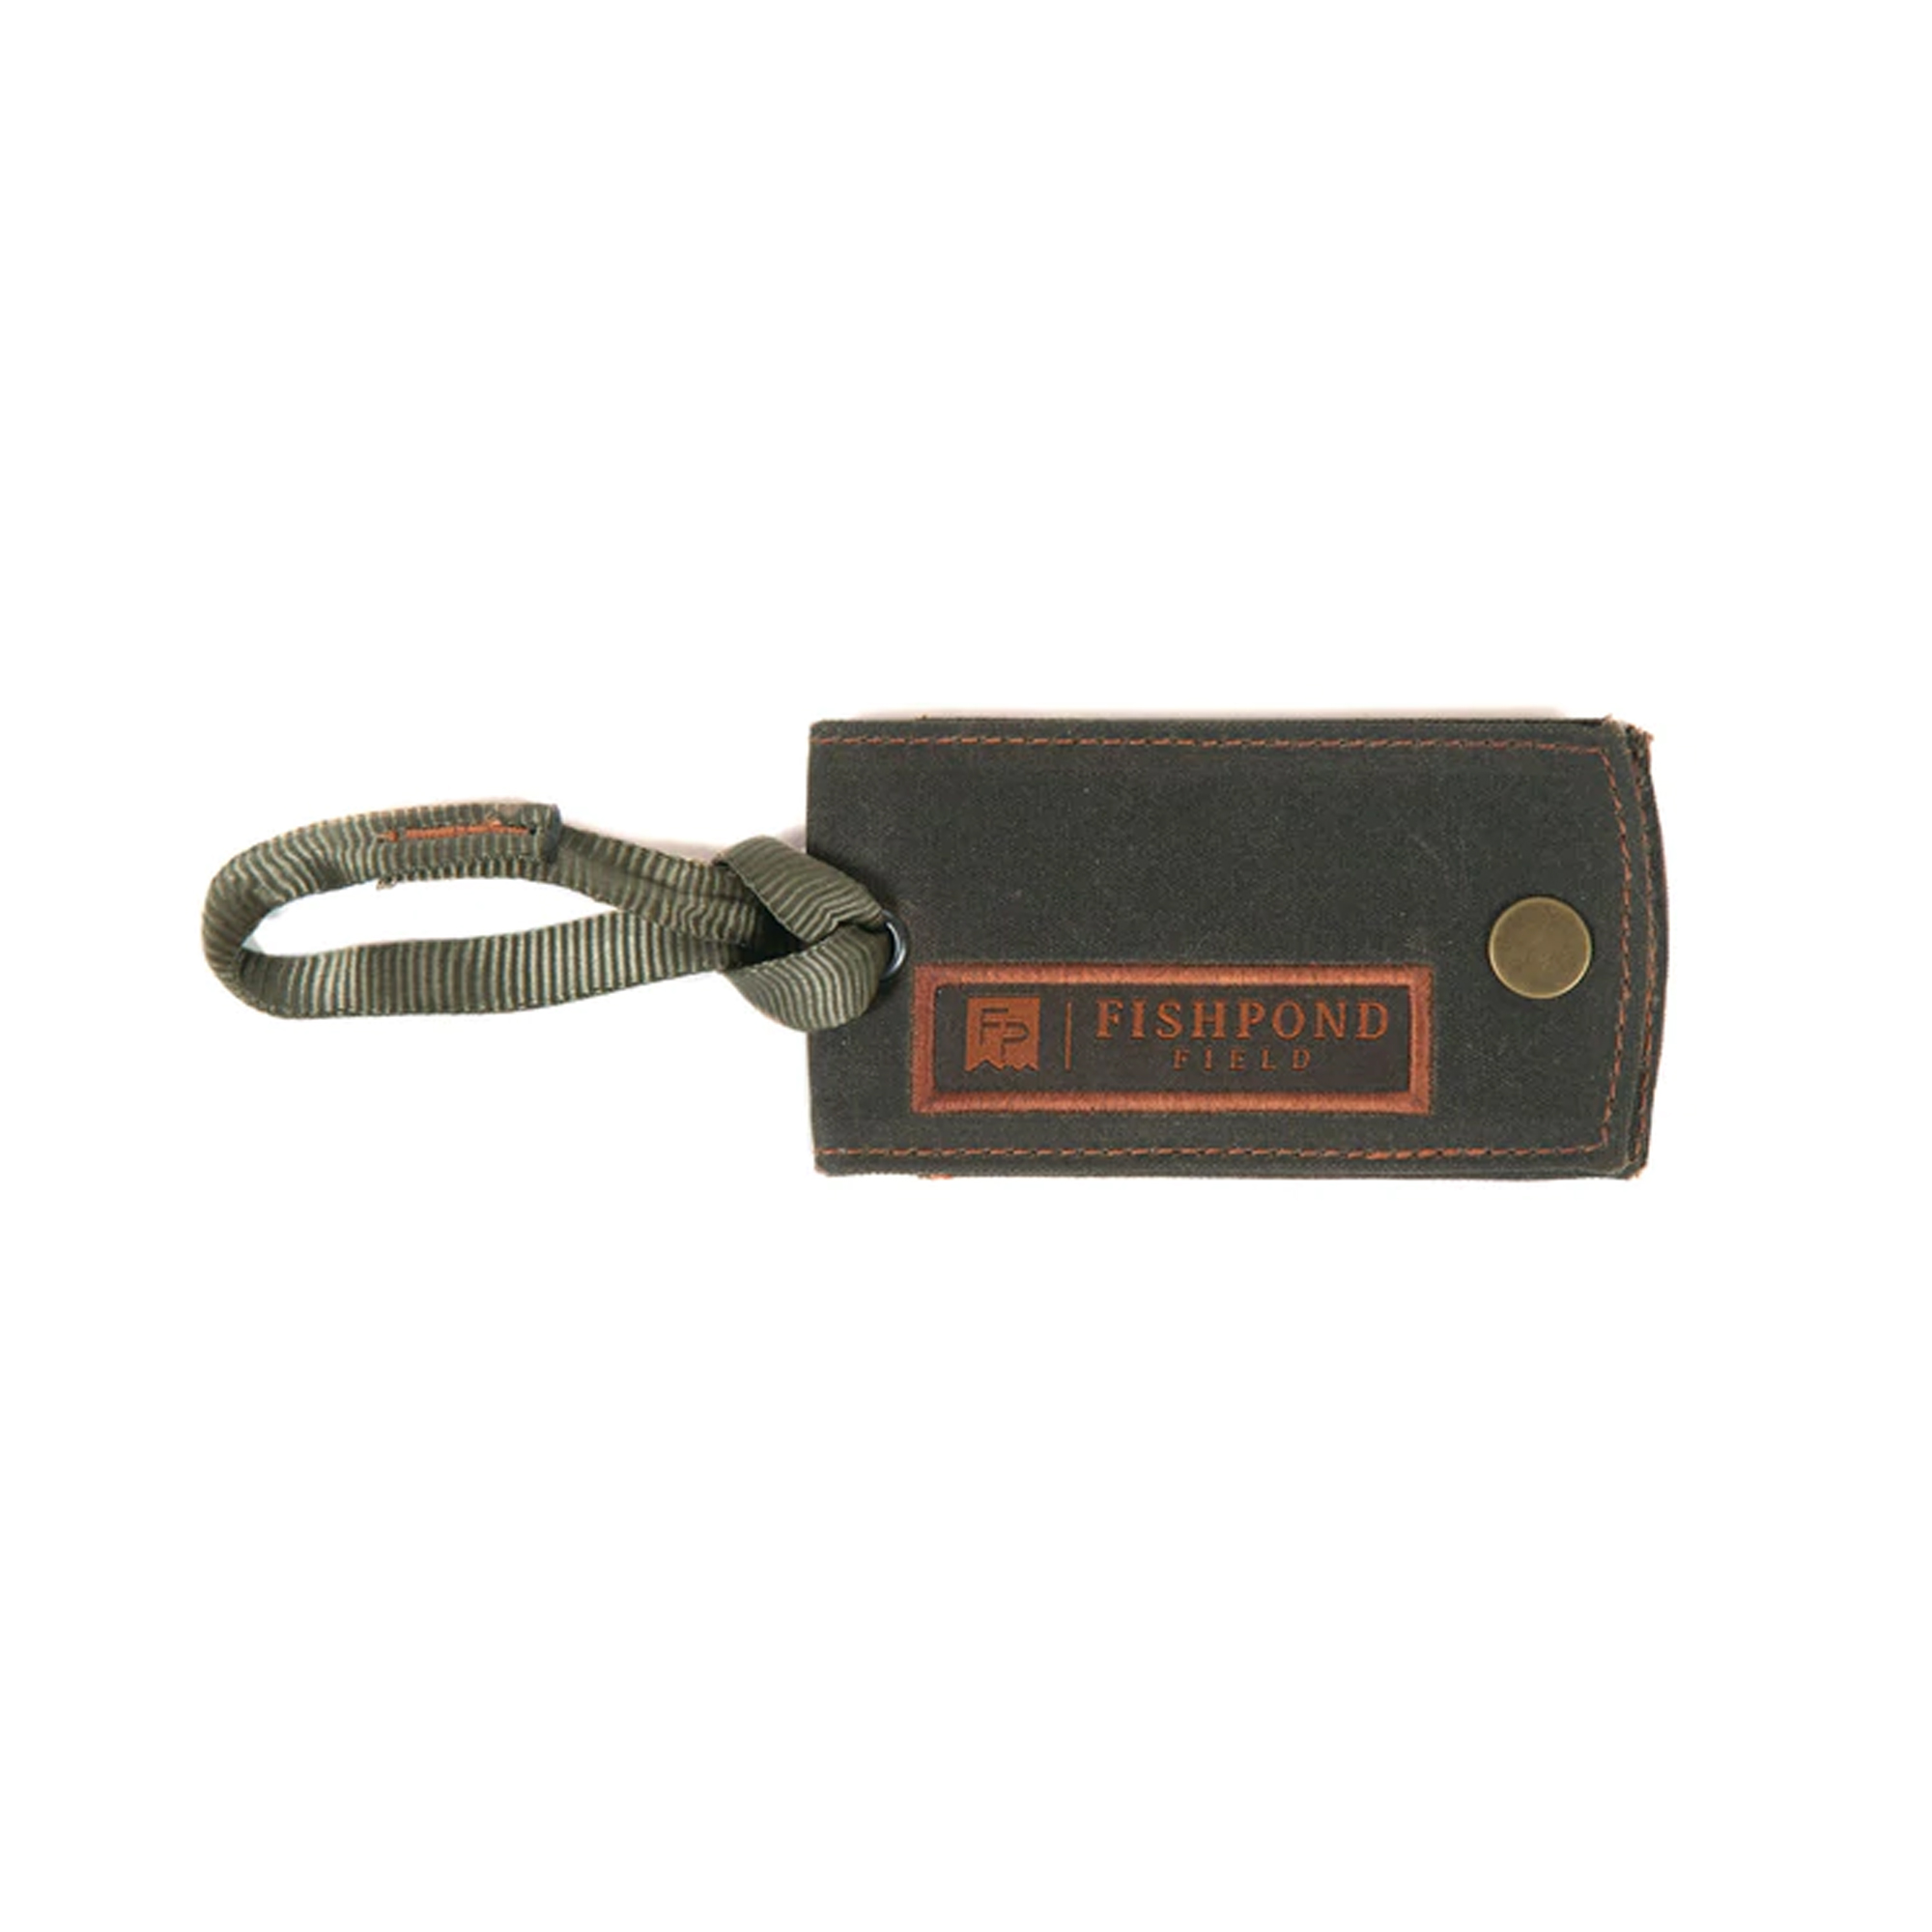 Fishpond FP Field Luggage Tag – Guide Flyfishing